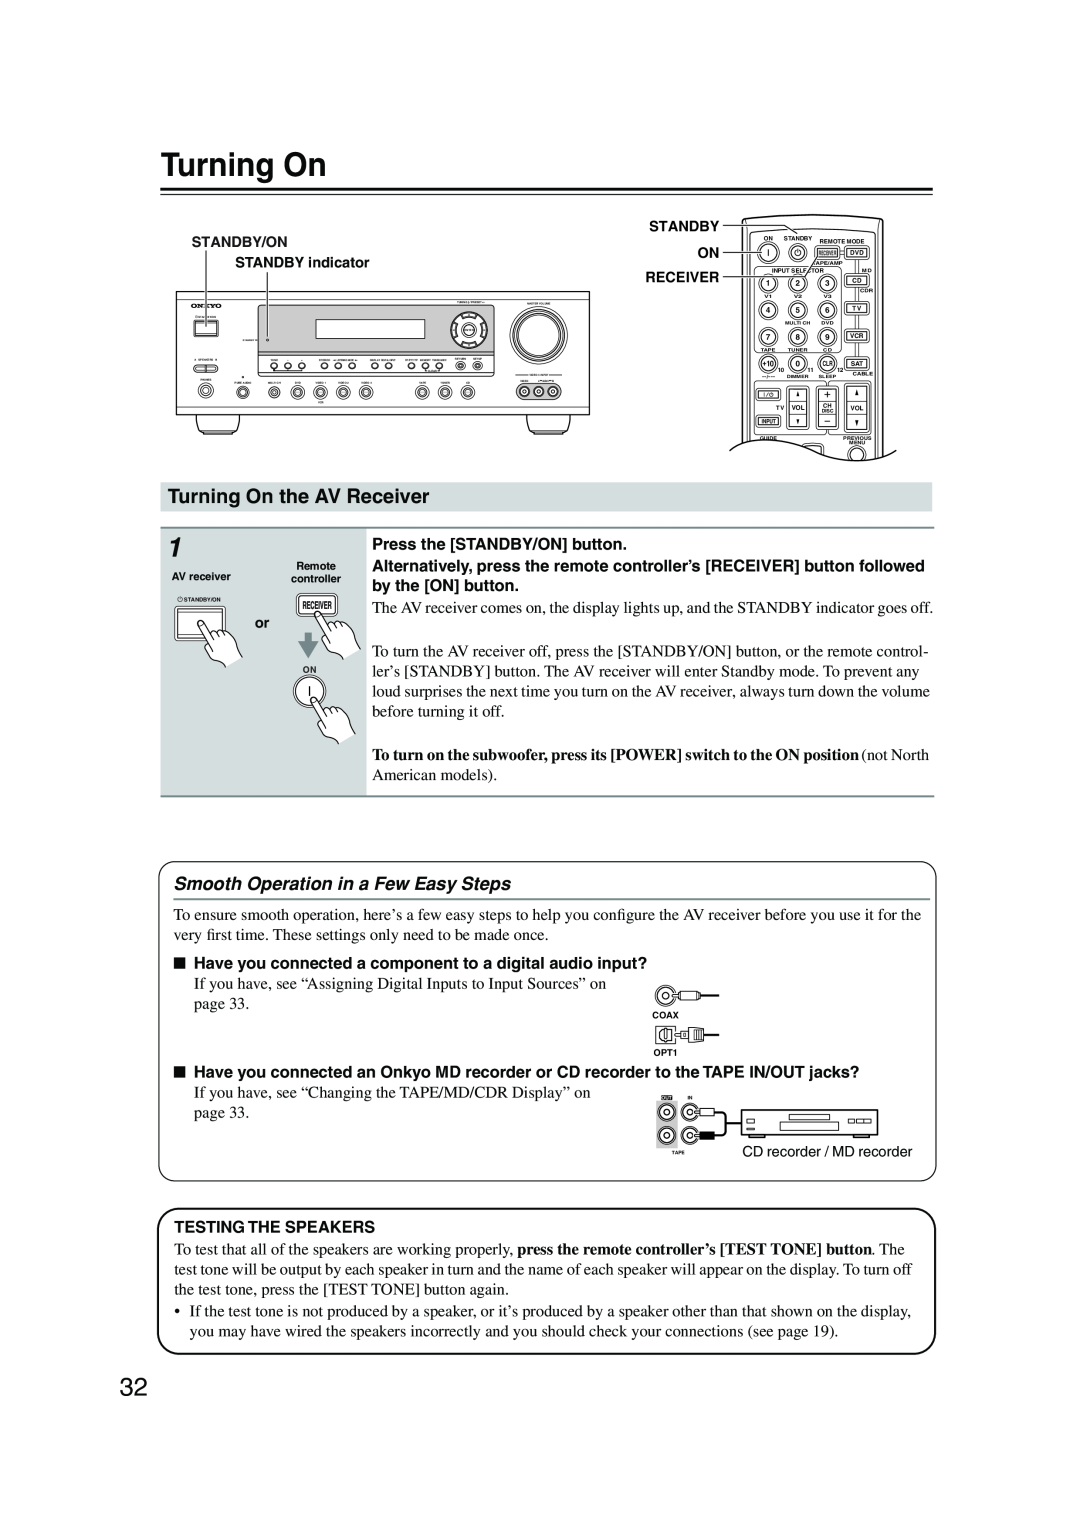 Onkyo HT-S780 instruction manual Turning On the AV Receiver, Smooth Operation in a Few Easy Steps 